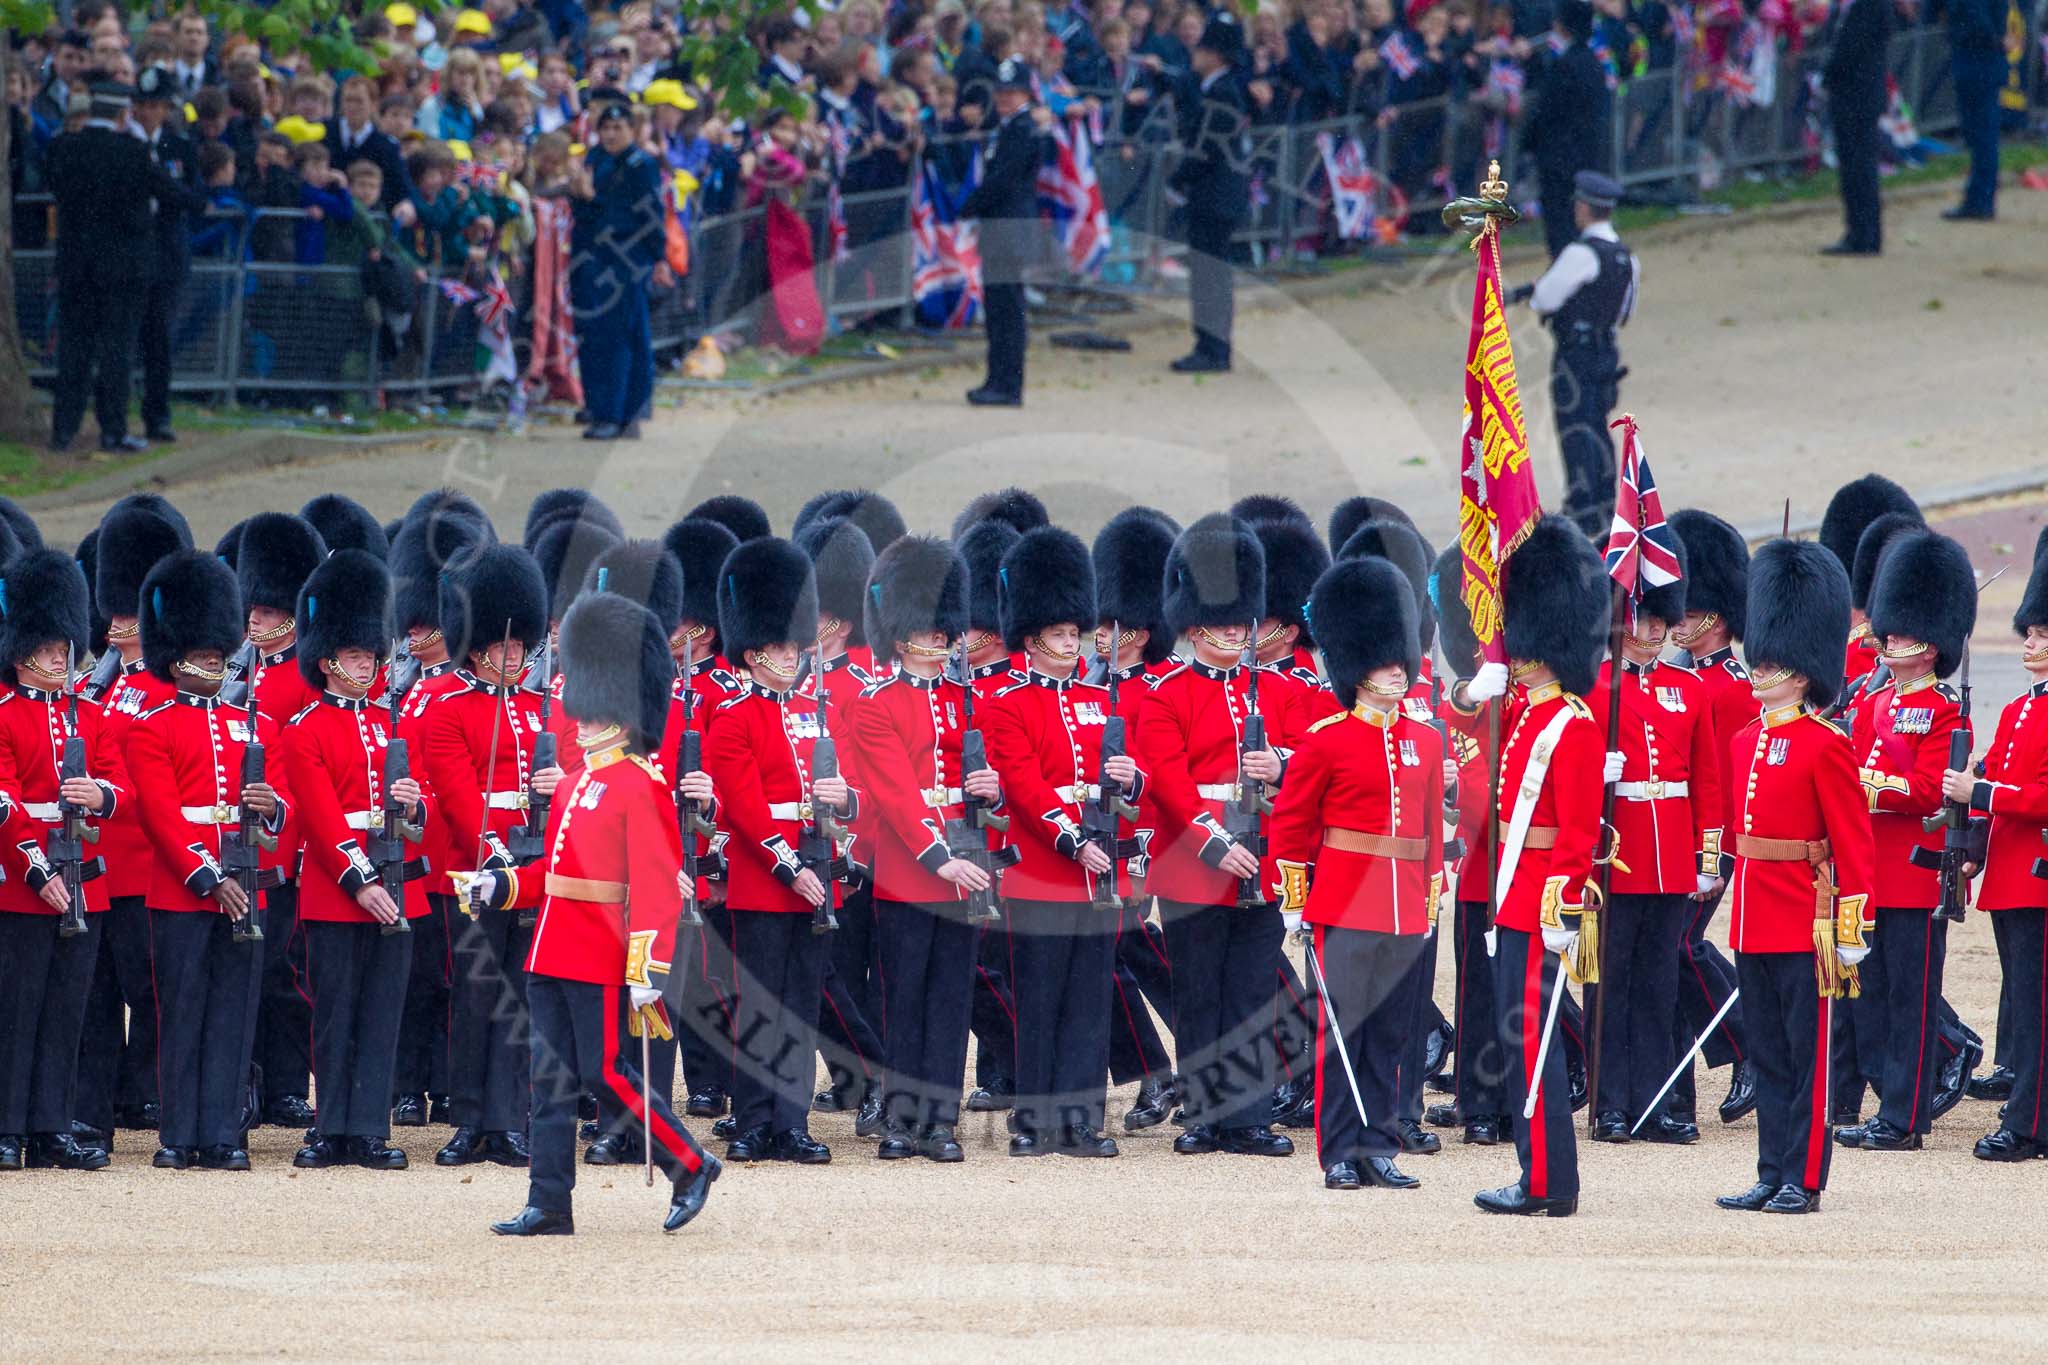 Trooping the Colour 2012: The Colour has been trooped along No. 6 Guard, F Company Scots Guards, on the right hand side of Horse Guards Parade, and the Ensign now turns to the left, to troop the Colour along No. 5 to No. 2 Guard..
Horse Guards Parade, Westminster,
London SW1,

United Kingdom,
on 16 June 2012 at 11:26, image #344